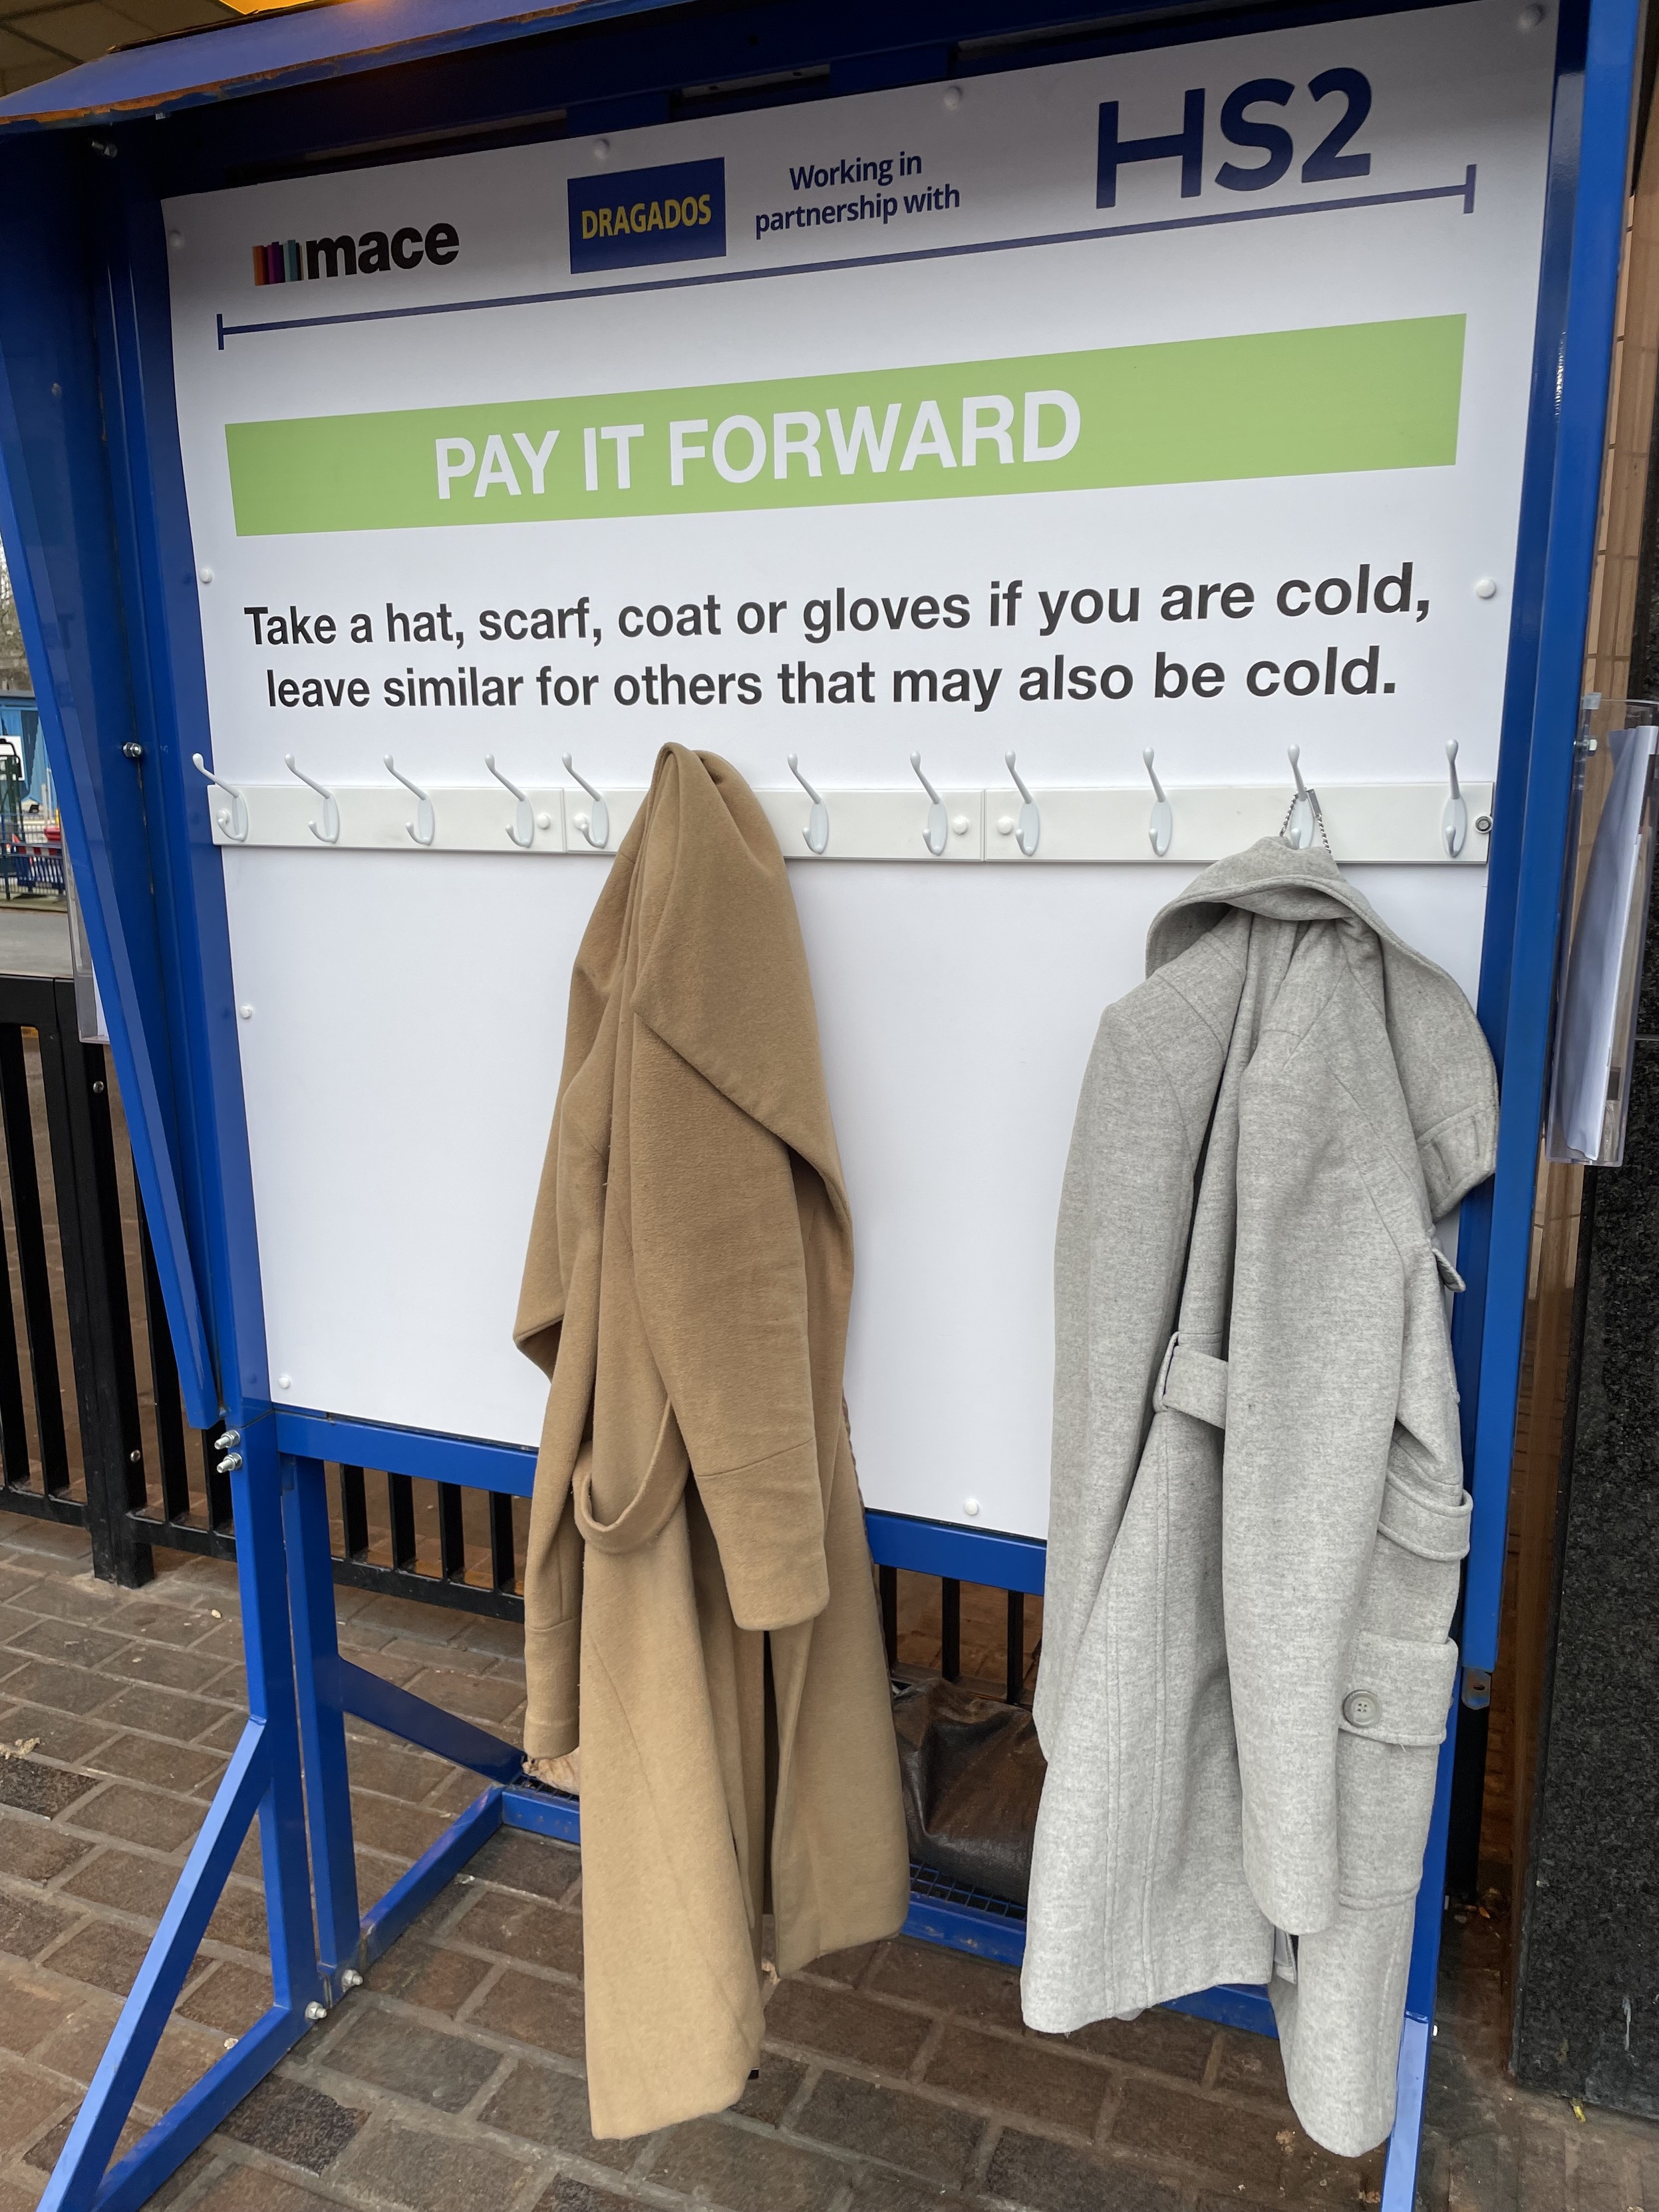 Costs hung up outside a train station. The sign reads:
PAY IT FORWARD
Take a hat, scarf, coat or gloves if you are cold, leave similar for others that may also be cold.